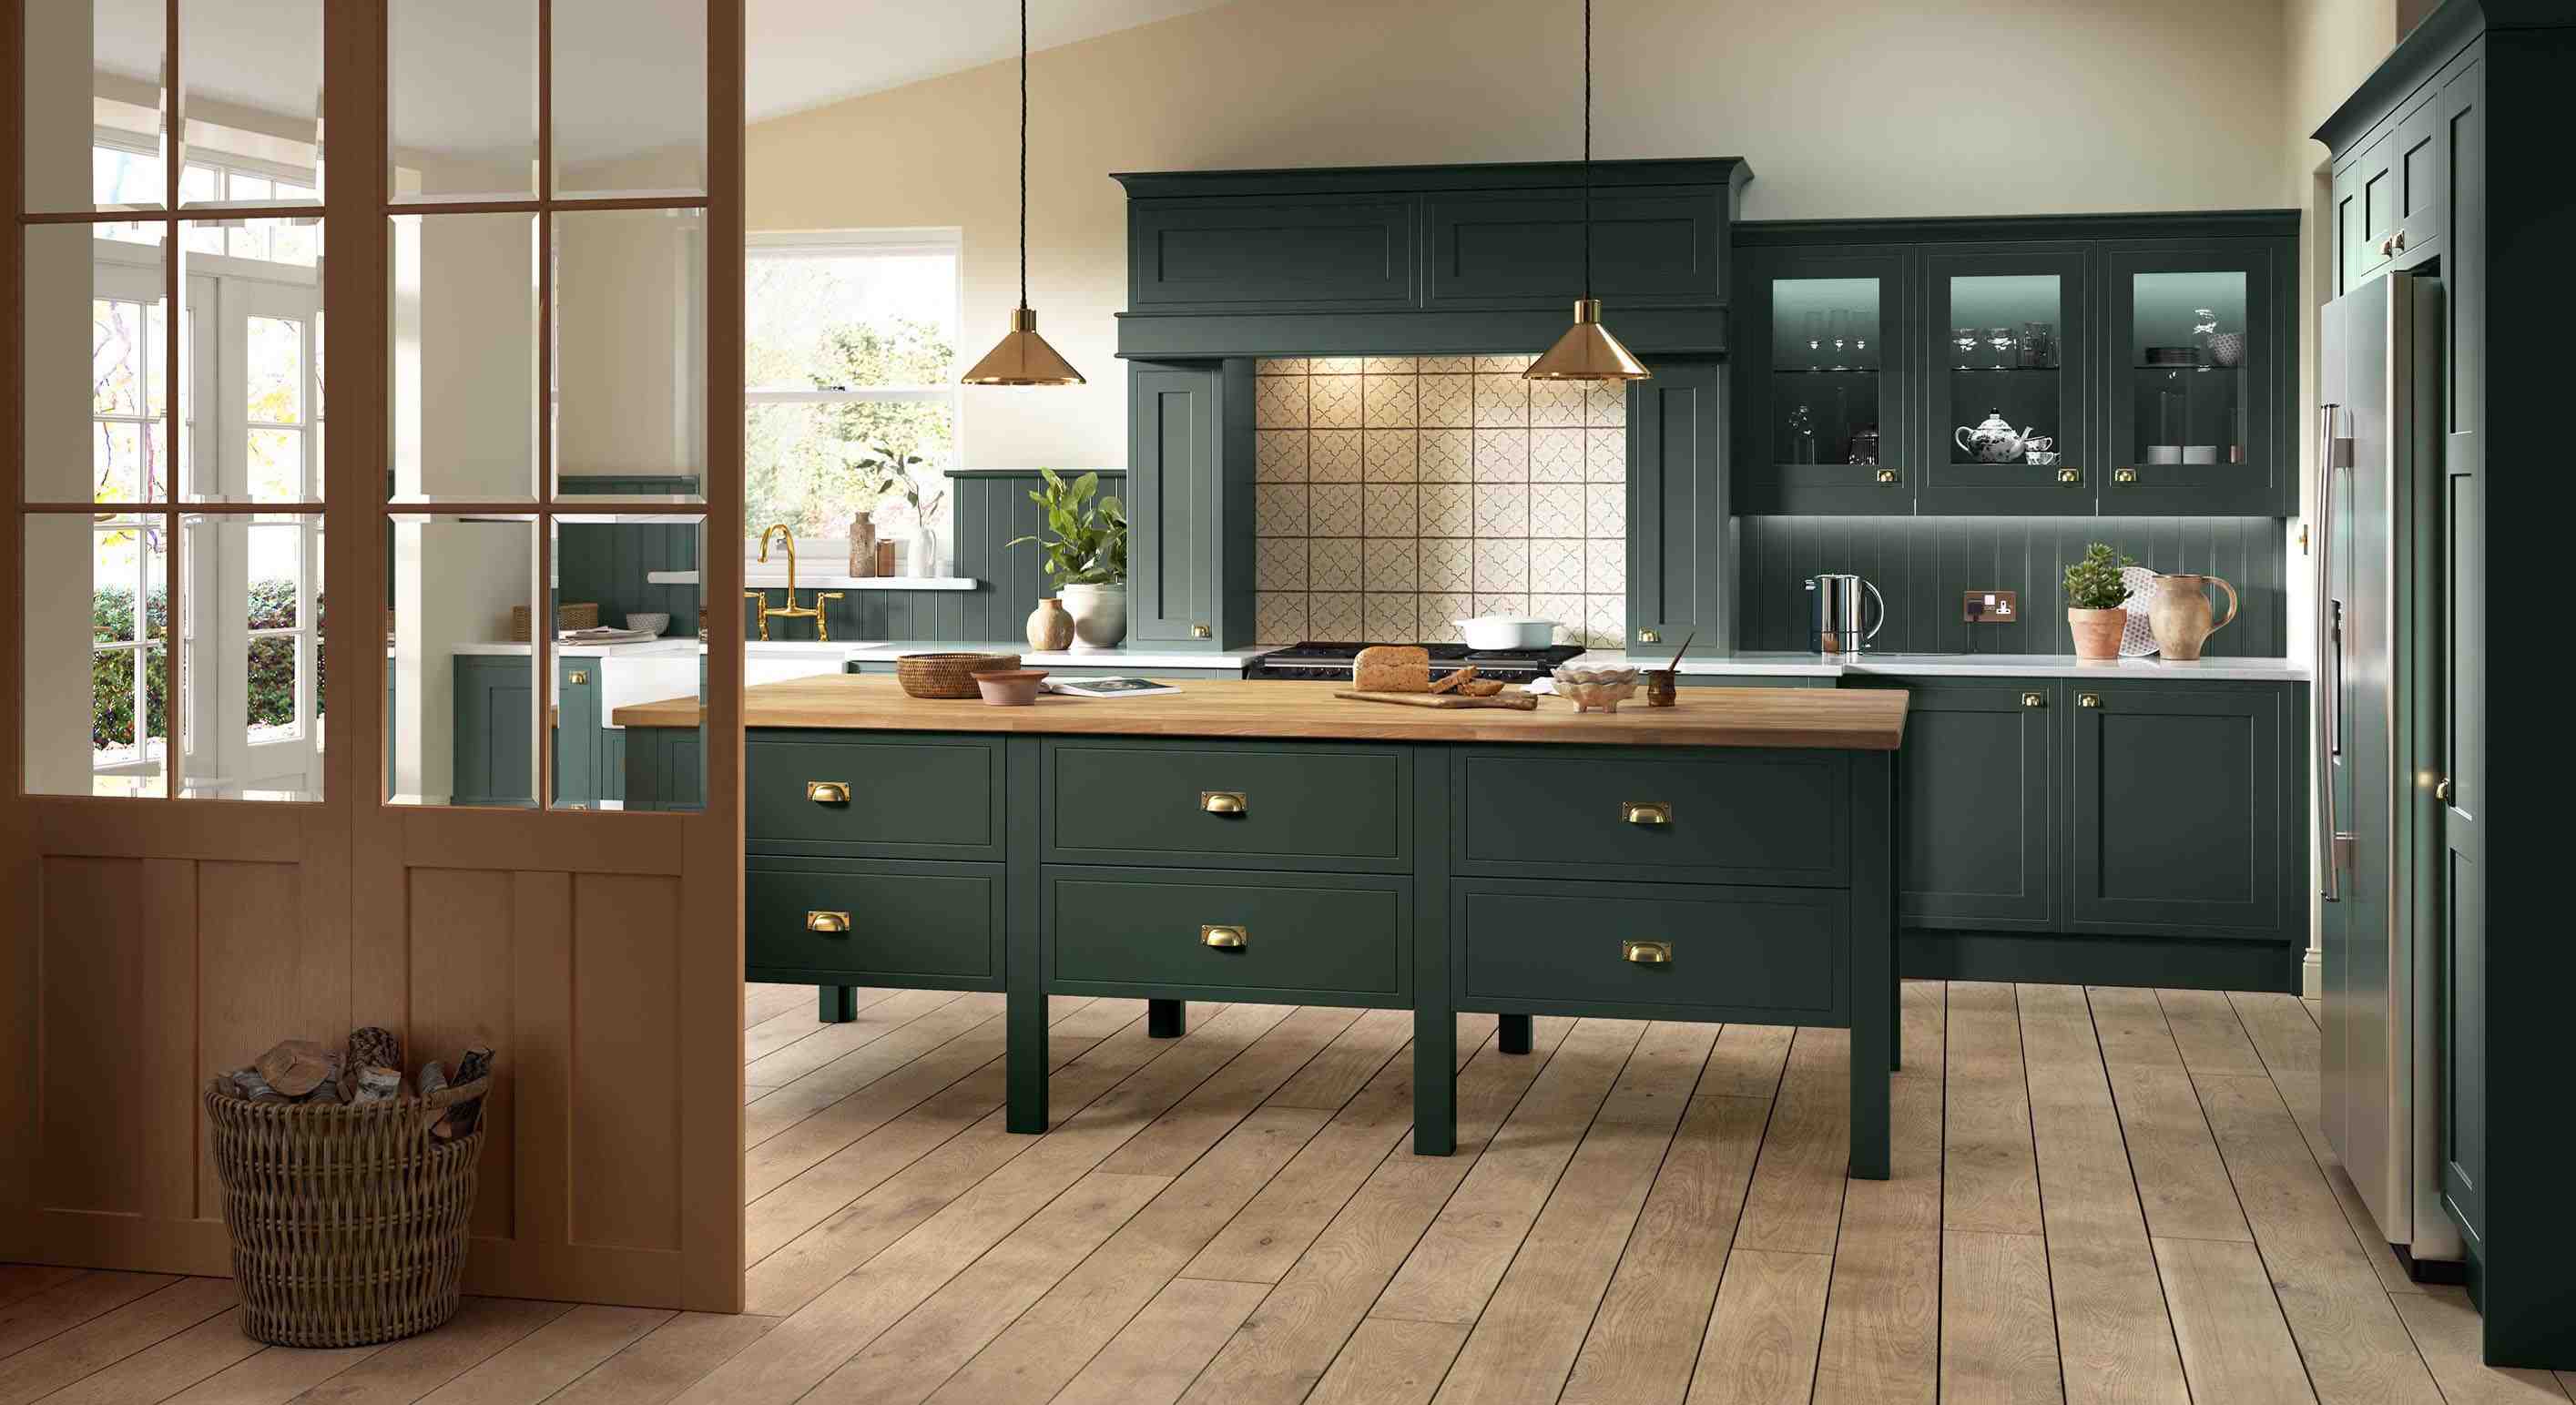 a timeless classic, ellesmere offers style in abundance. its subtle line detailing on the outer front of the door creates the illusion of a true inframe kitchen but with a more affordable price tag. ellesmere’s superior smooth matte painted finish and wealth of accessories combines luxury and practicality to create a kitchen that’s perfect for everyday living and entertaining.